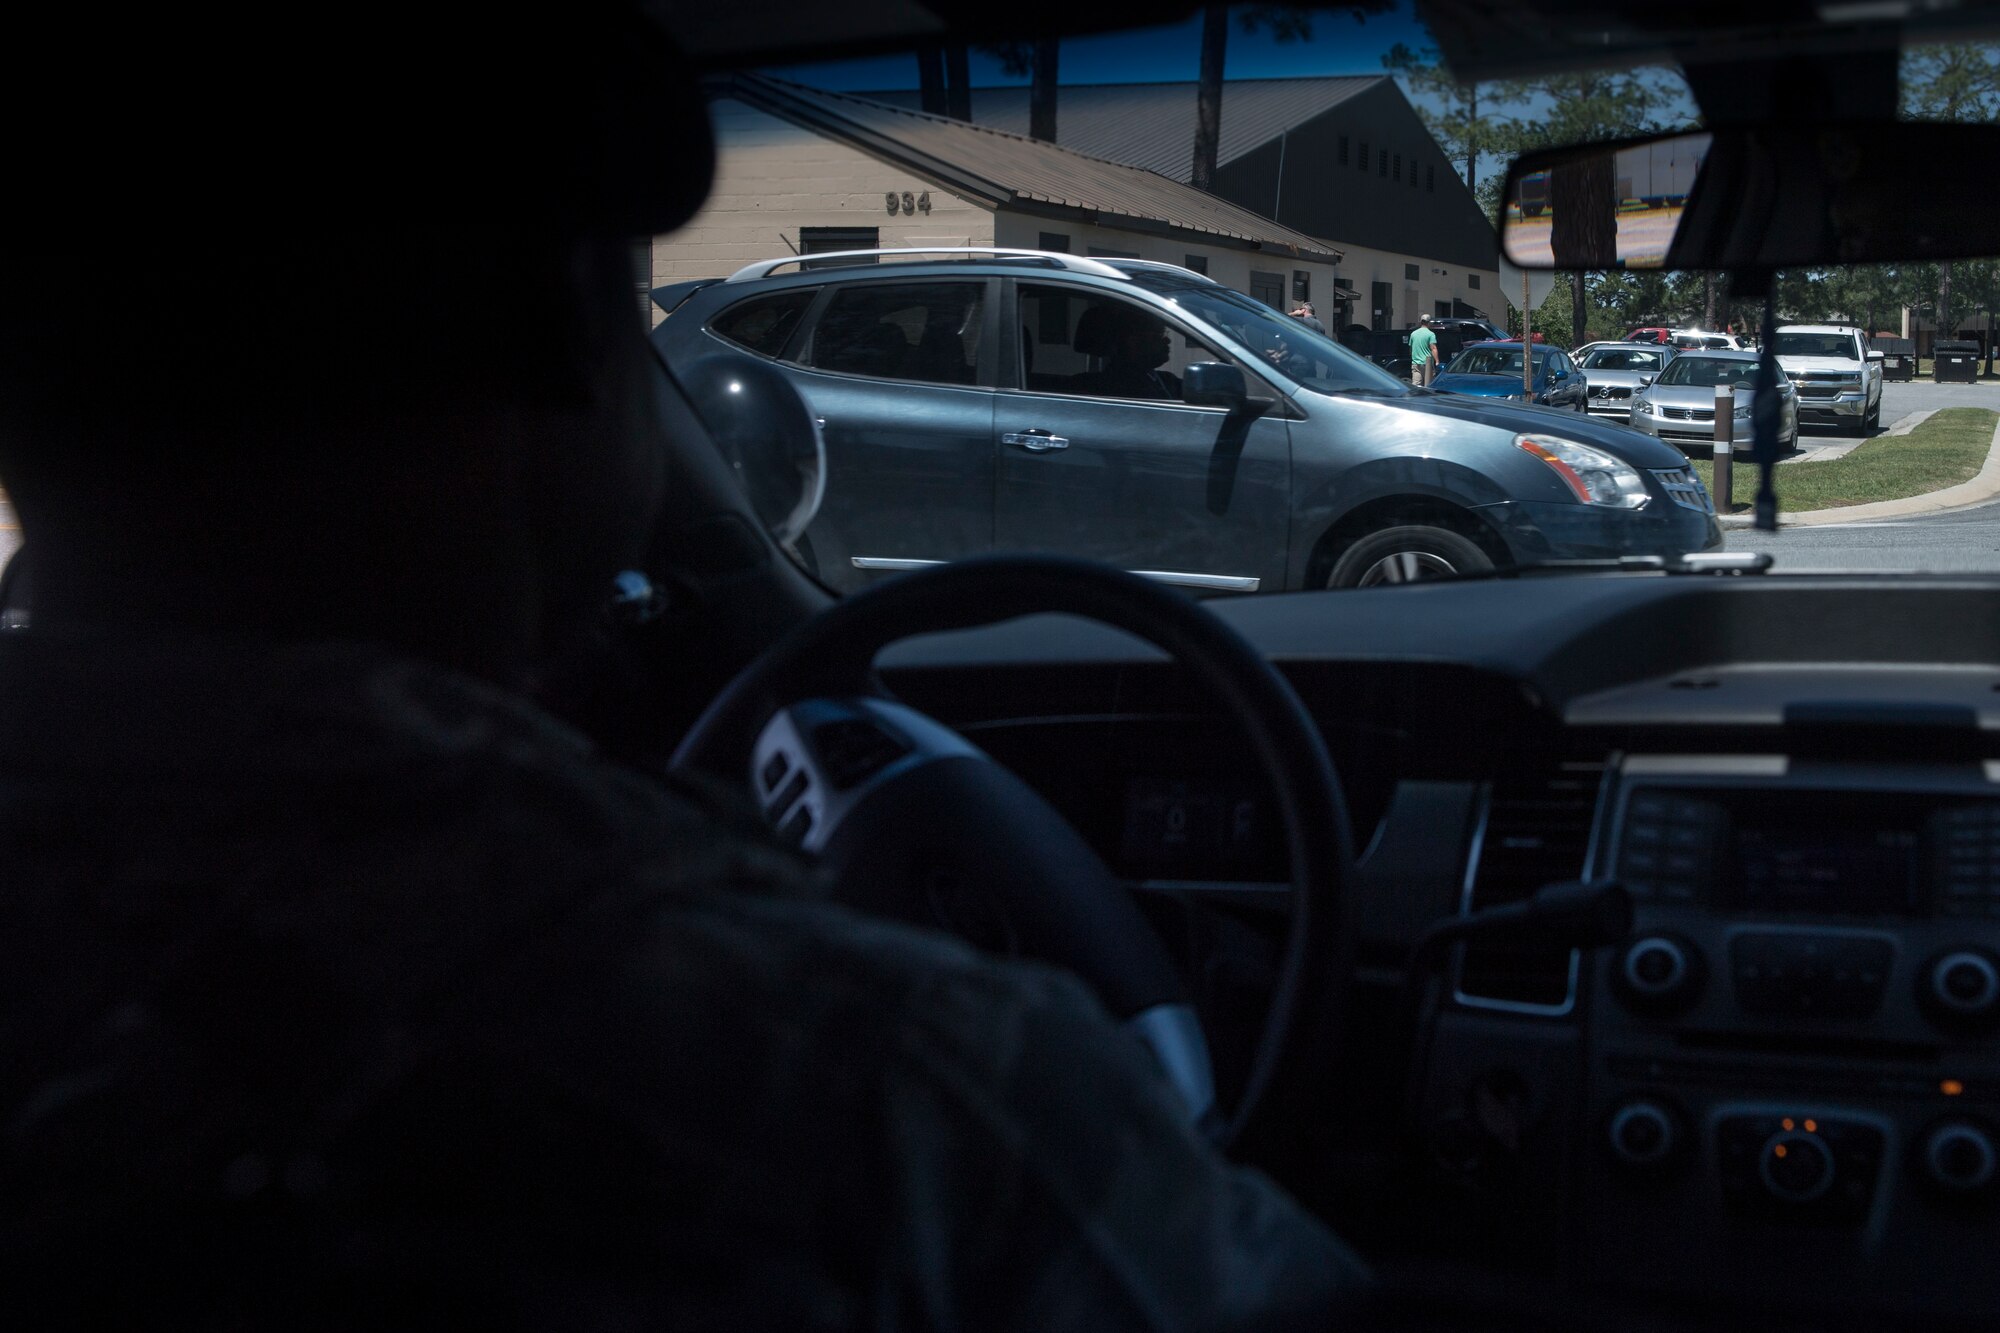 Tech. Sgt. Jamaal Smalls, 23d Security Forces Squadron (SFS) flight chief, watches Airman 1st Class Eugene Oliver, 23d Wing photojournalist apprentice, drive-by while on his cell phone during a simulated distracted driving traffic stop, April 17, 2018, at Moody Air Force Base, Ga. Since January 2018 there have been 13 distracted driving incidents at Moody, which has prompted the SFS patrolmen to heavily enforce distracted driver consequences for motorists on the installation. (U.S. Air Force photo by Senior Airman Janiqua P. Robinson)